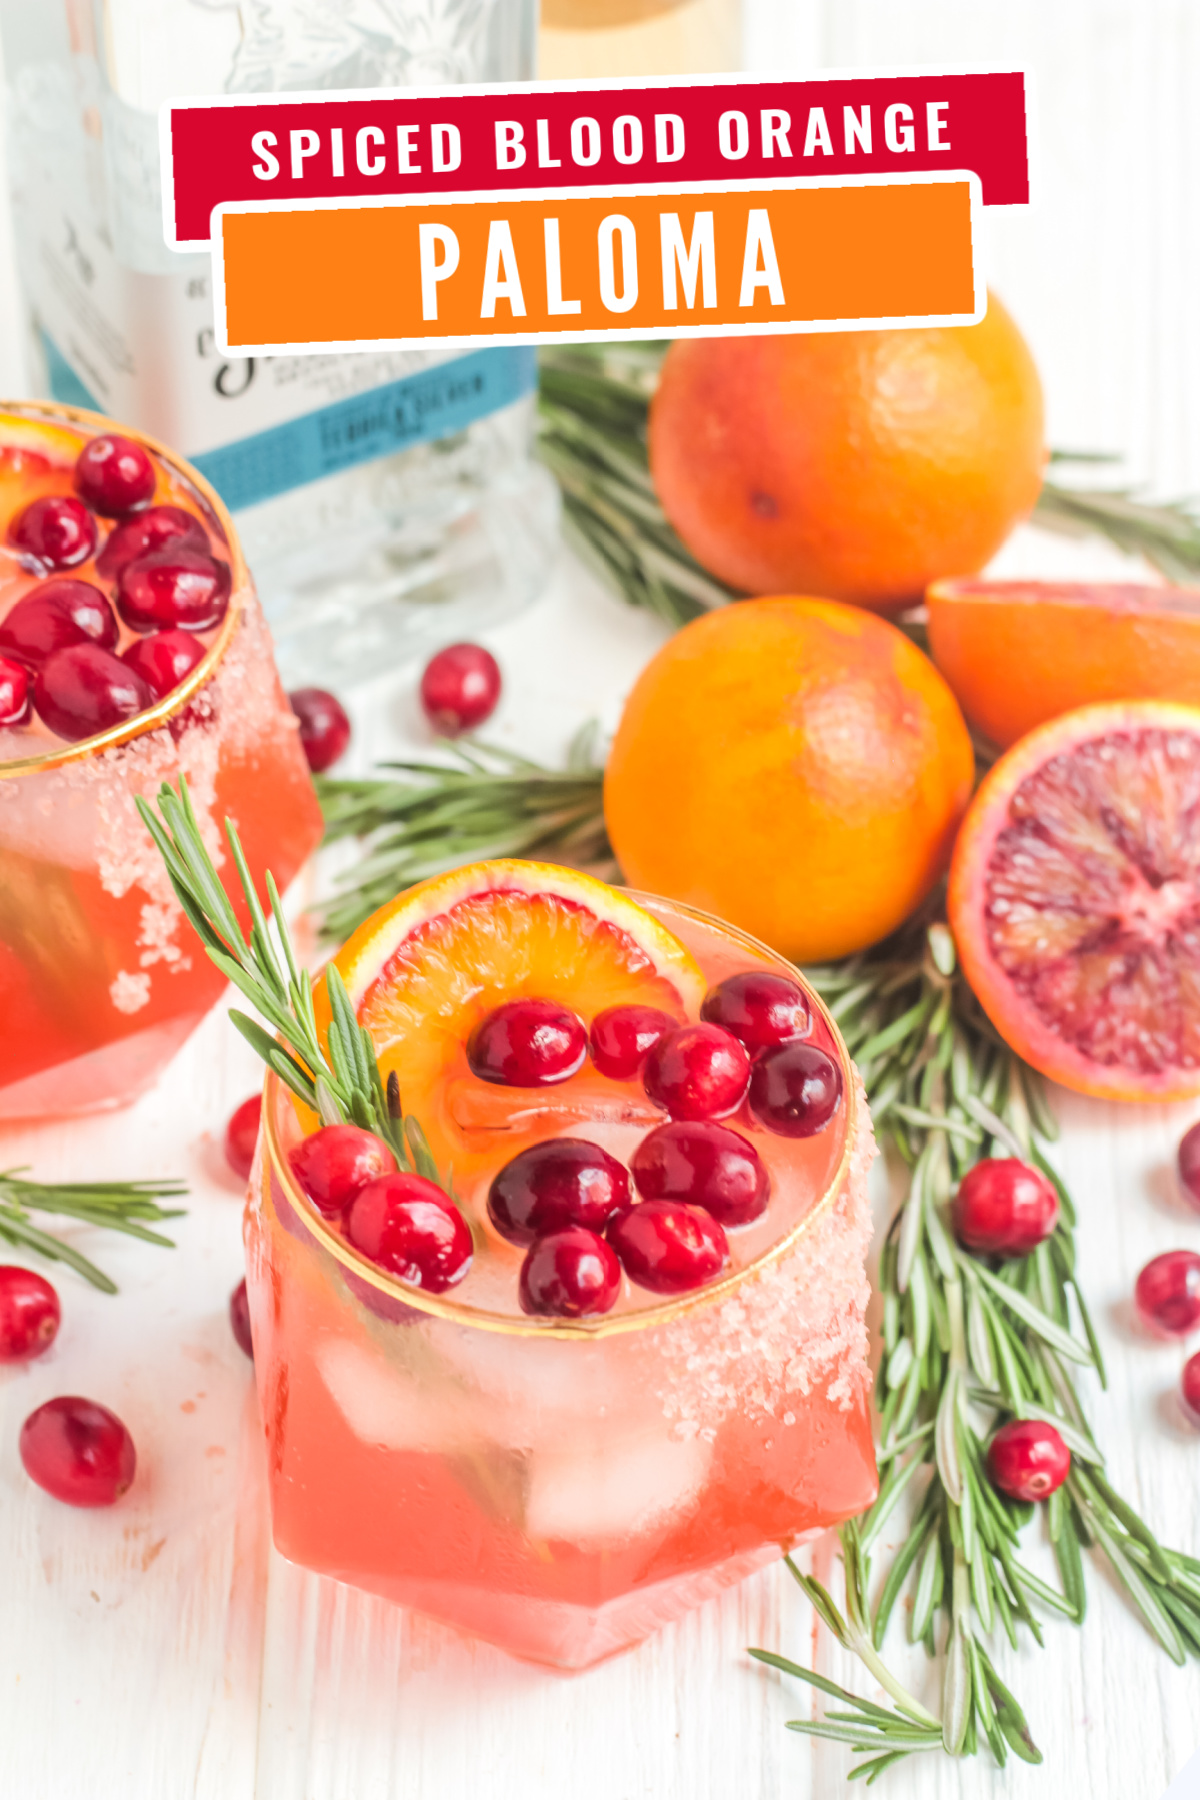 This festive Spiced Blood Orange Paloma Recipe is perfect for Christmas gatherings! This paloma recipe is citrusy, spiced and delicious.